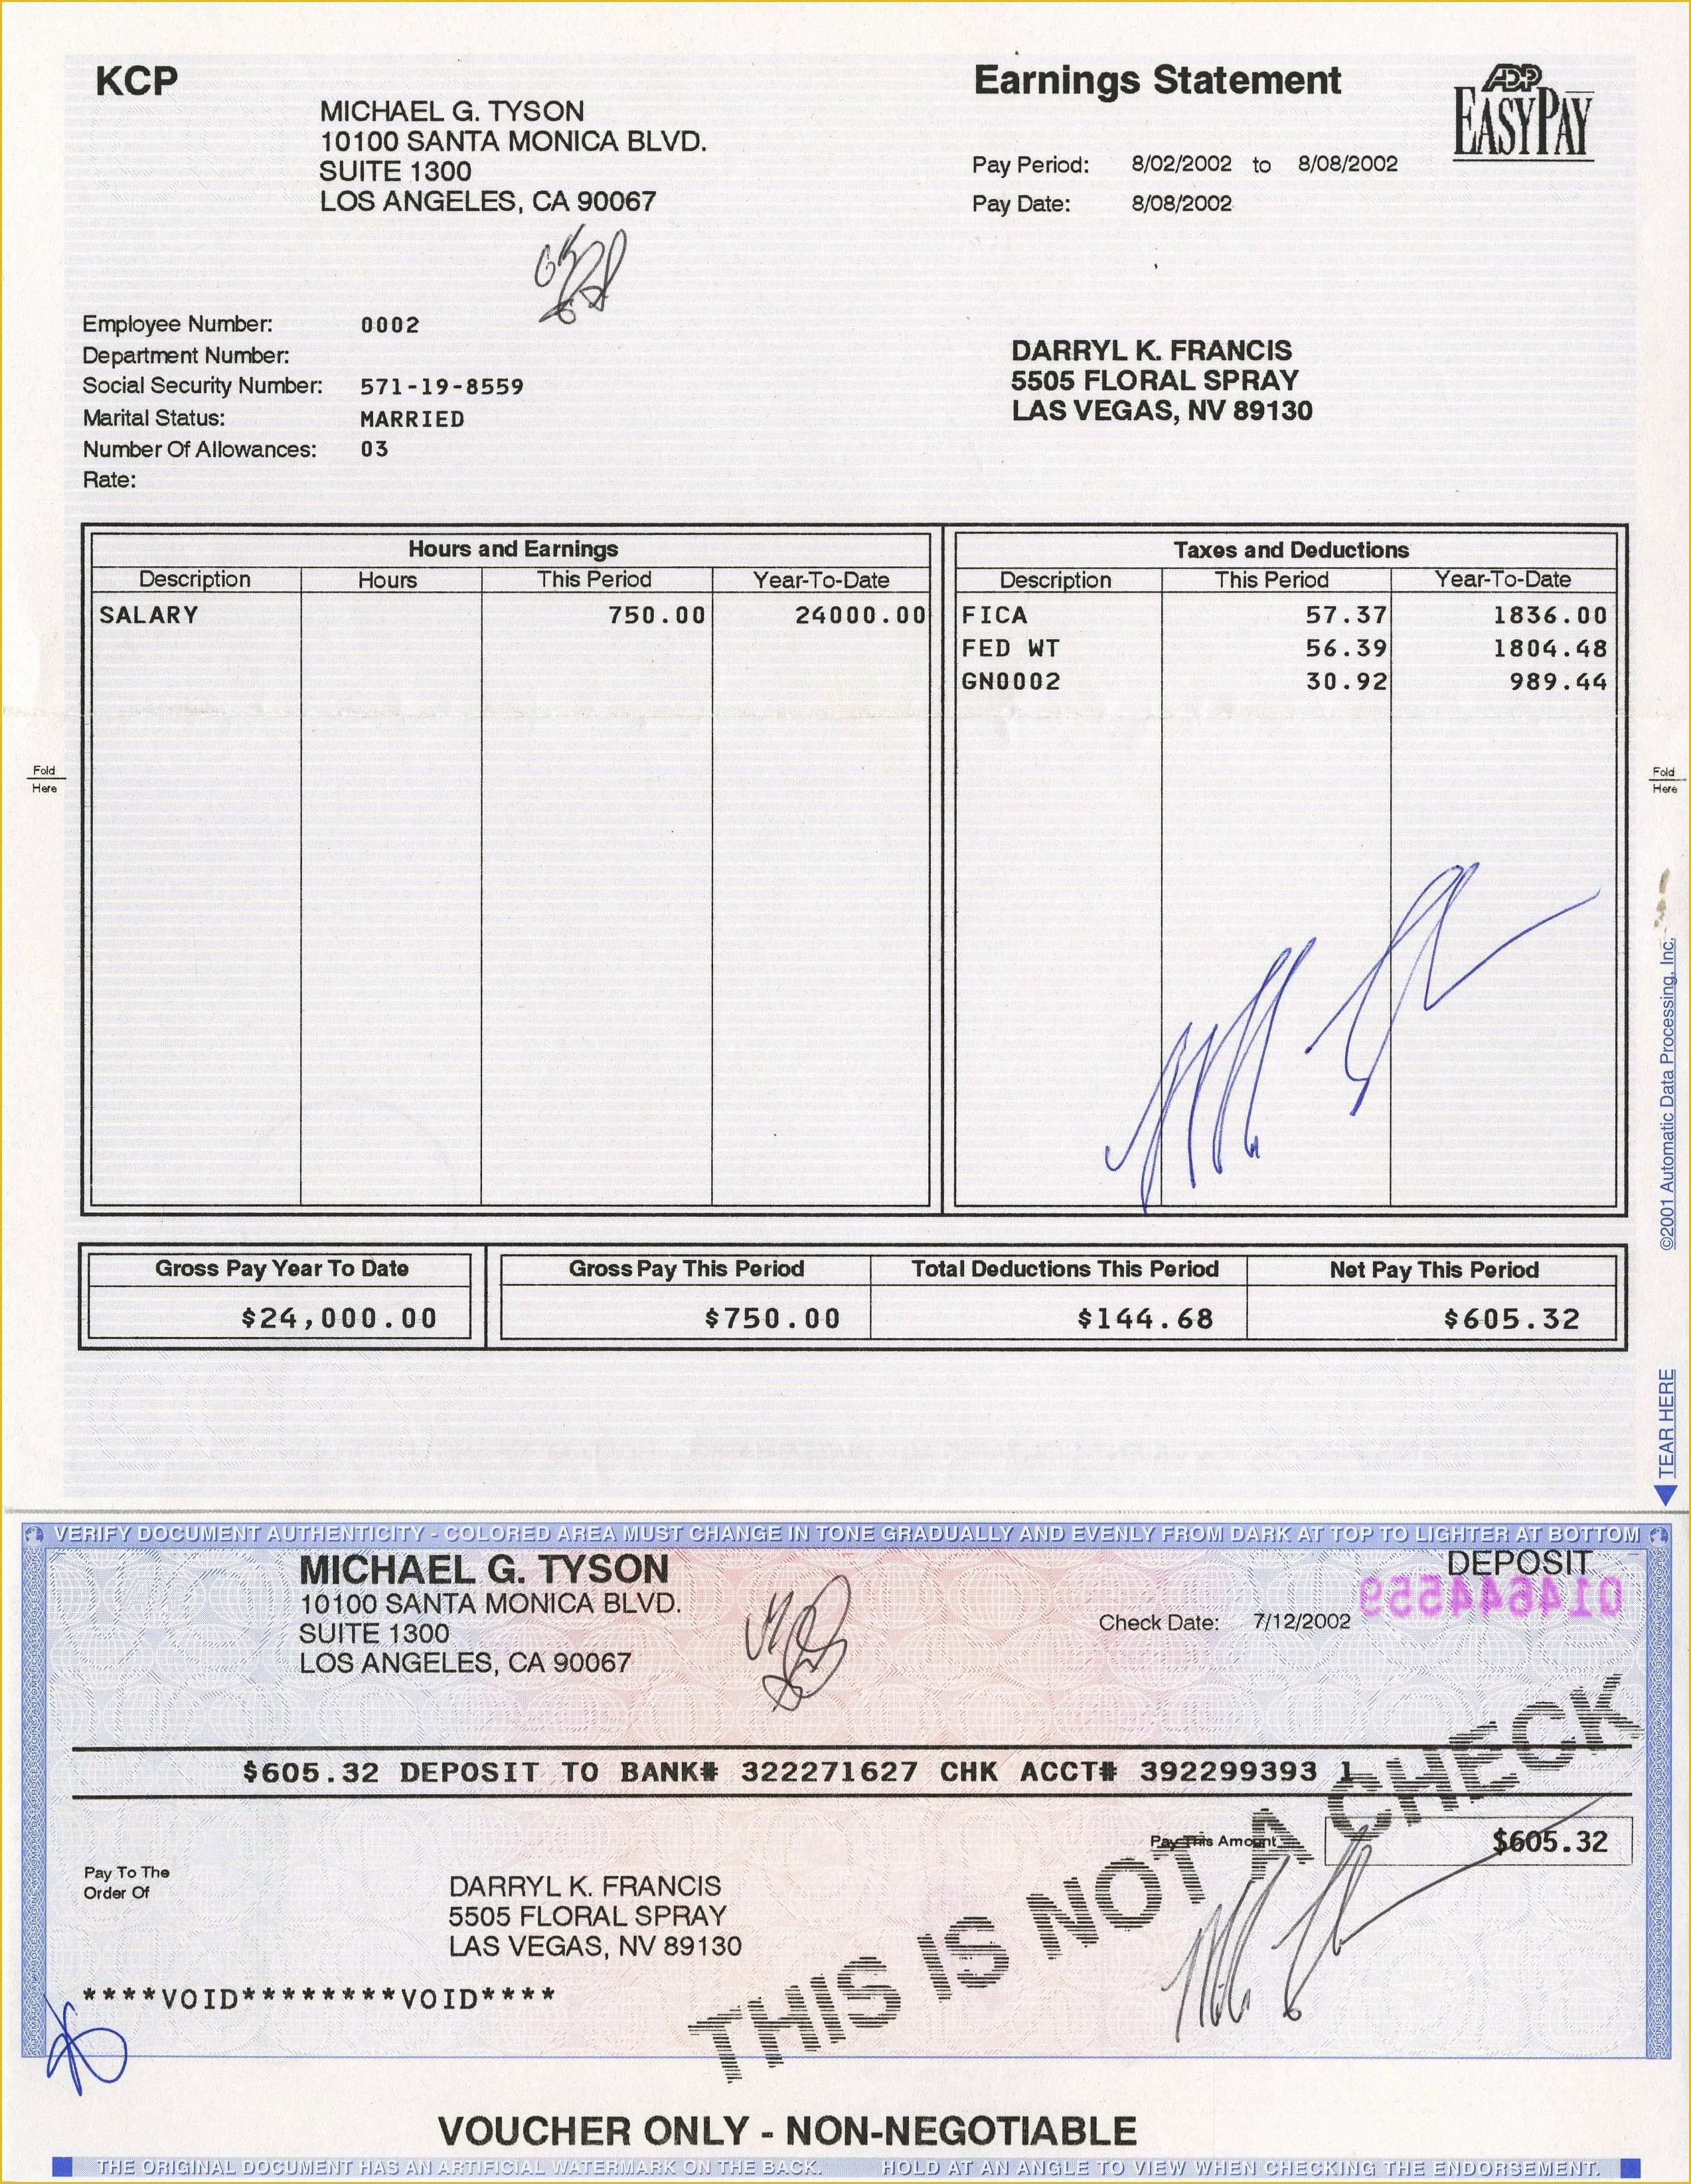 Payroll Check Template Free form Of Lot Detail Mike Tyson Signed Payroll Check and Earnings